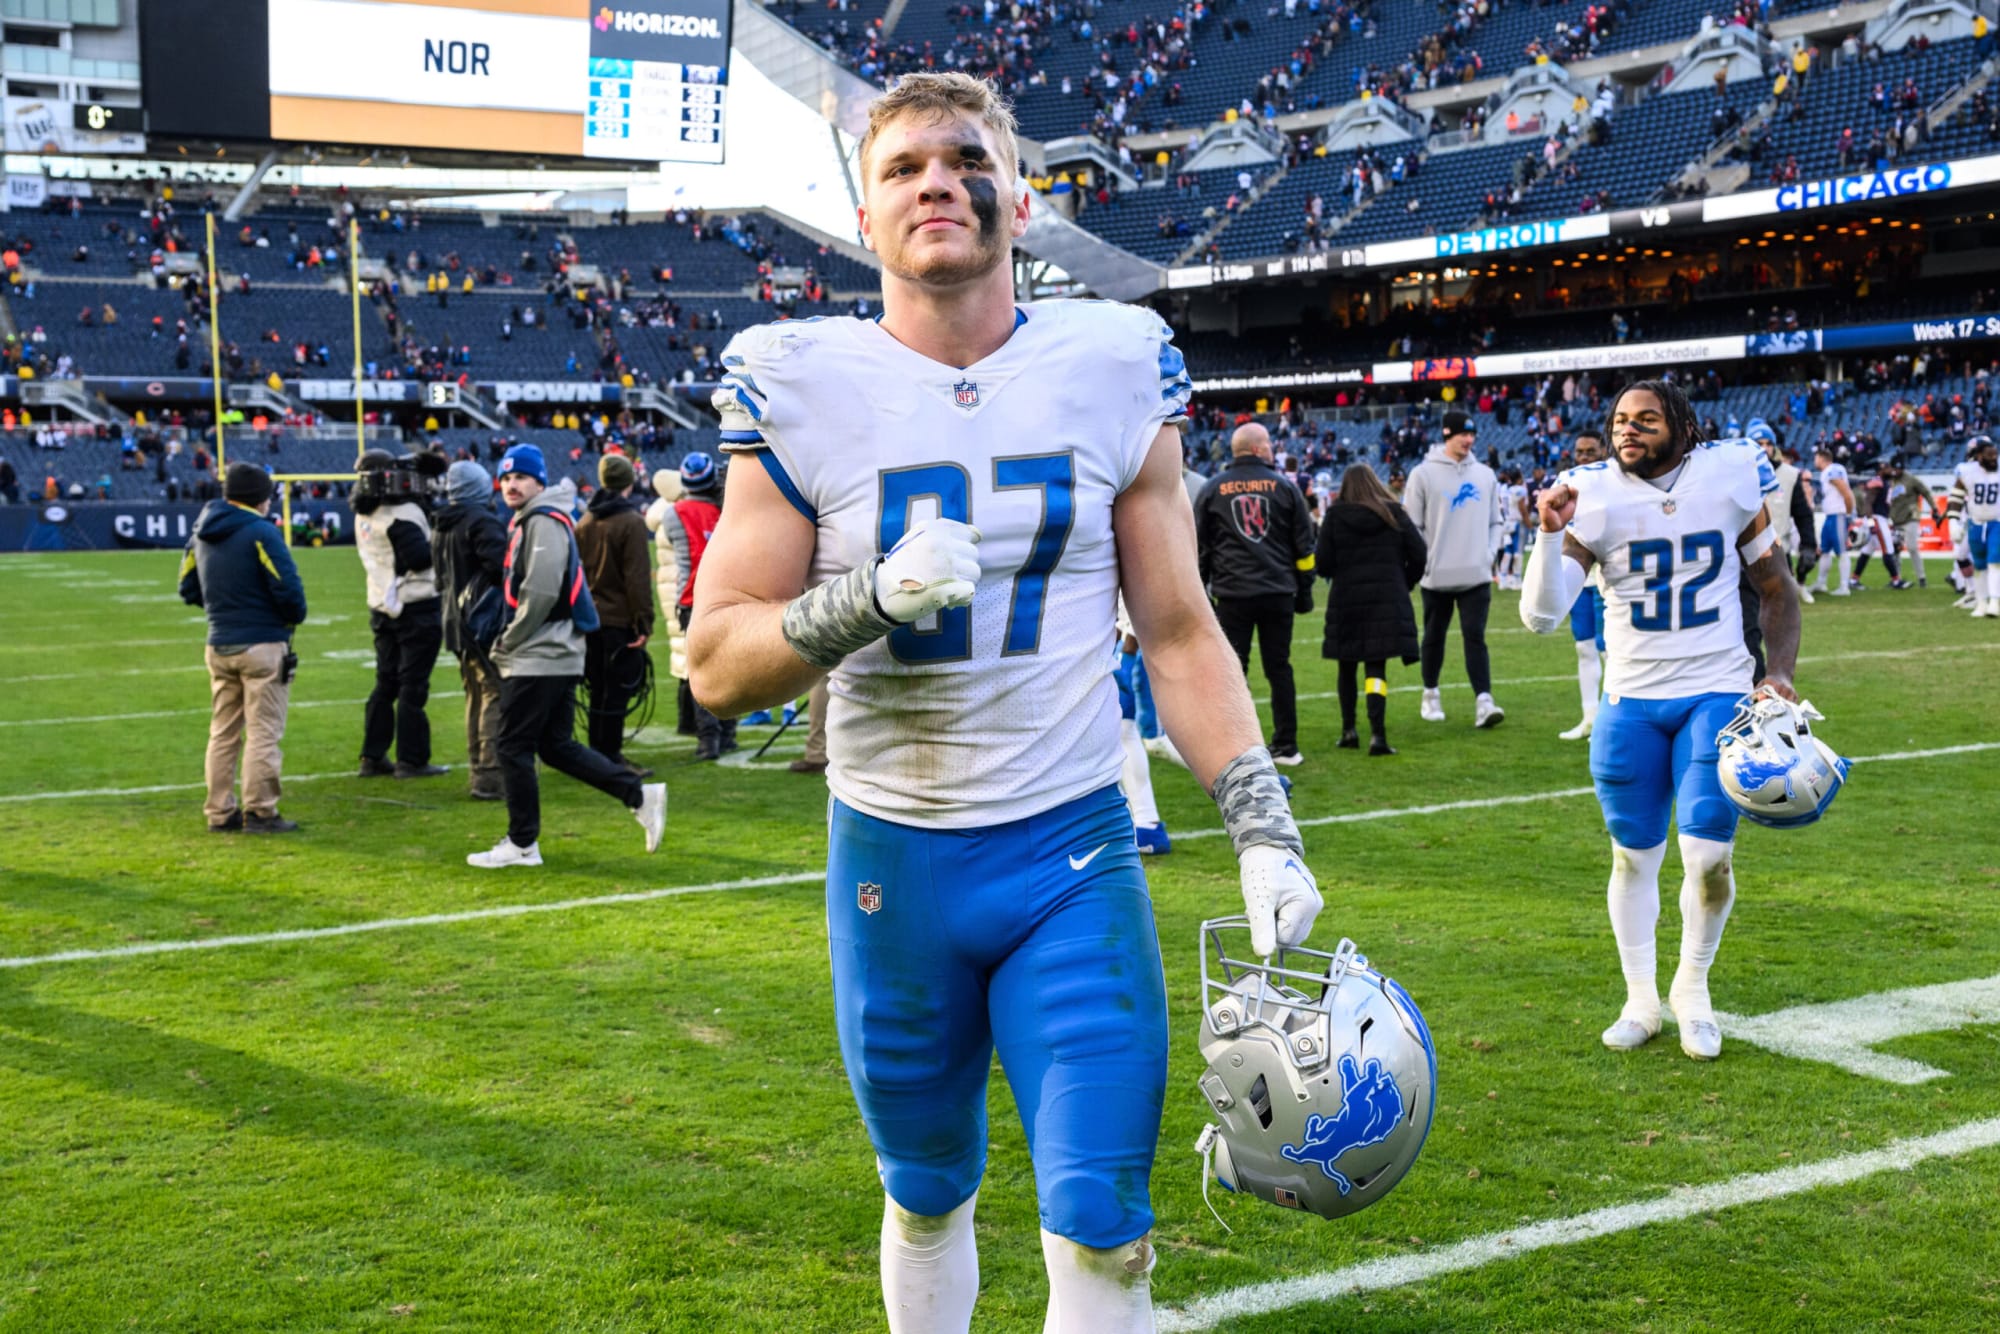 Detroit Lions had youngest roster in NFL last season according to